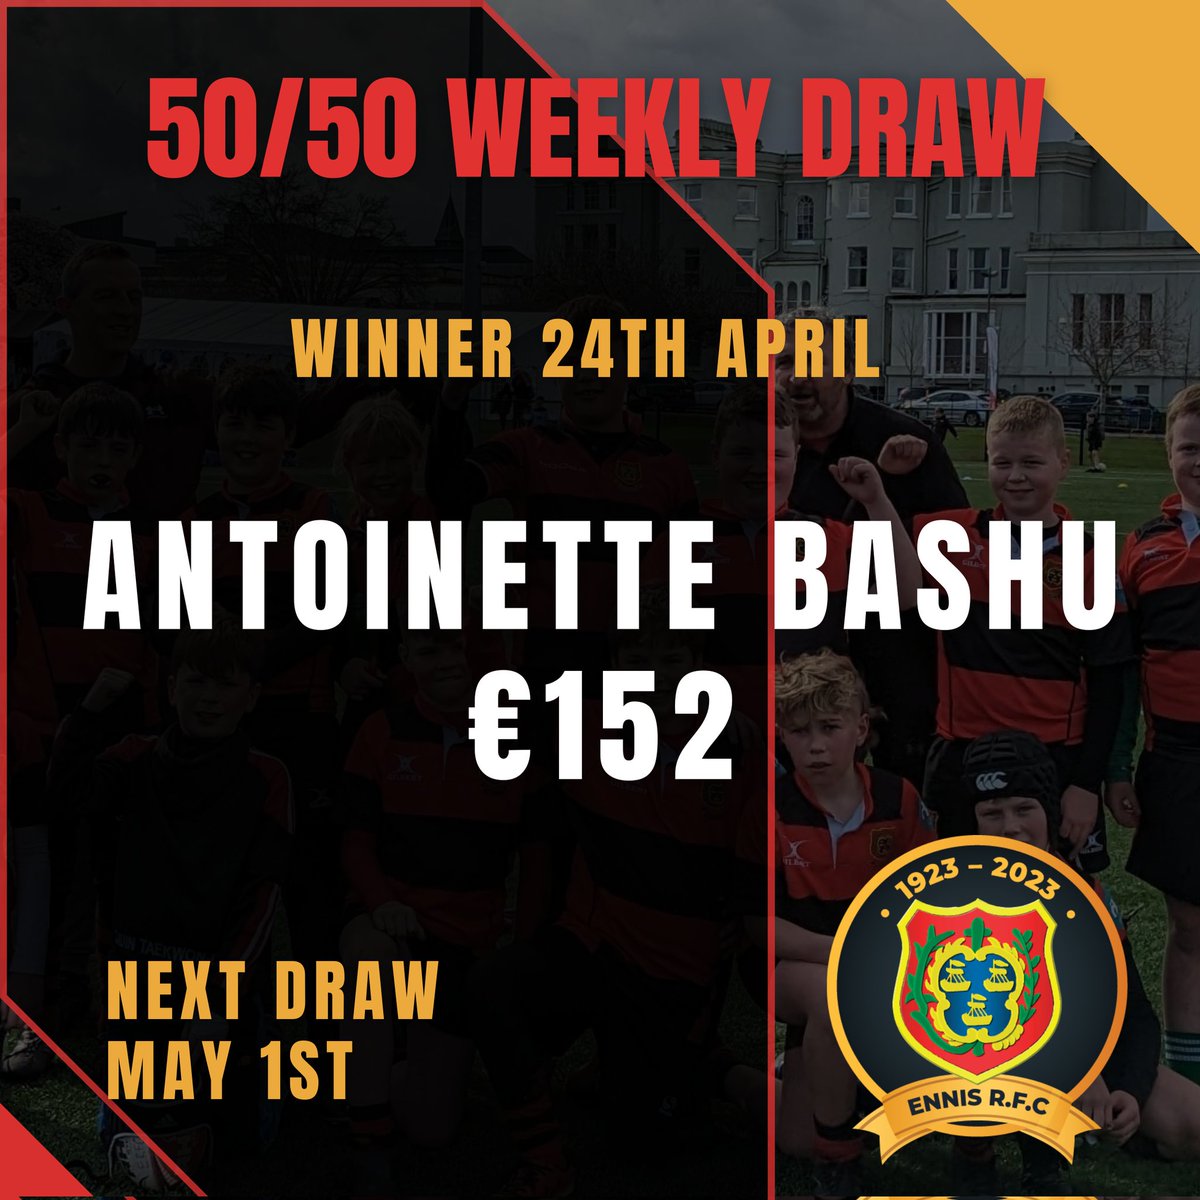 🟥⬛️ CONGRATULATIONS 🟥⬛️ To this Week's Winner, Antoinette Bashua who won as a Subscriber! 🏆 Enter online here: ennisrfc.ie/50-50-draw/?fs… OR Revolut: 089 415 6836 OR at many of our local pubs